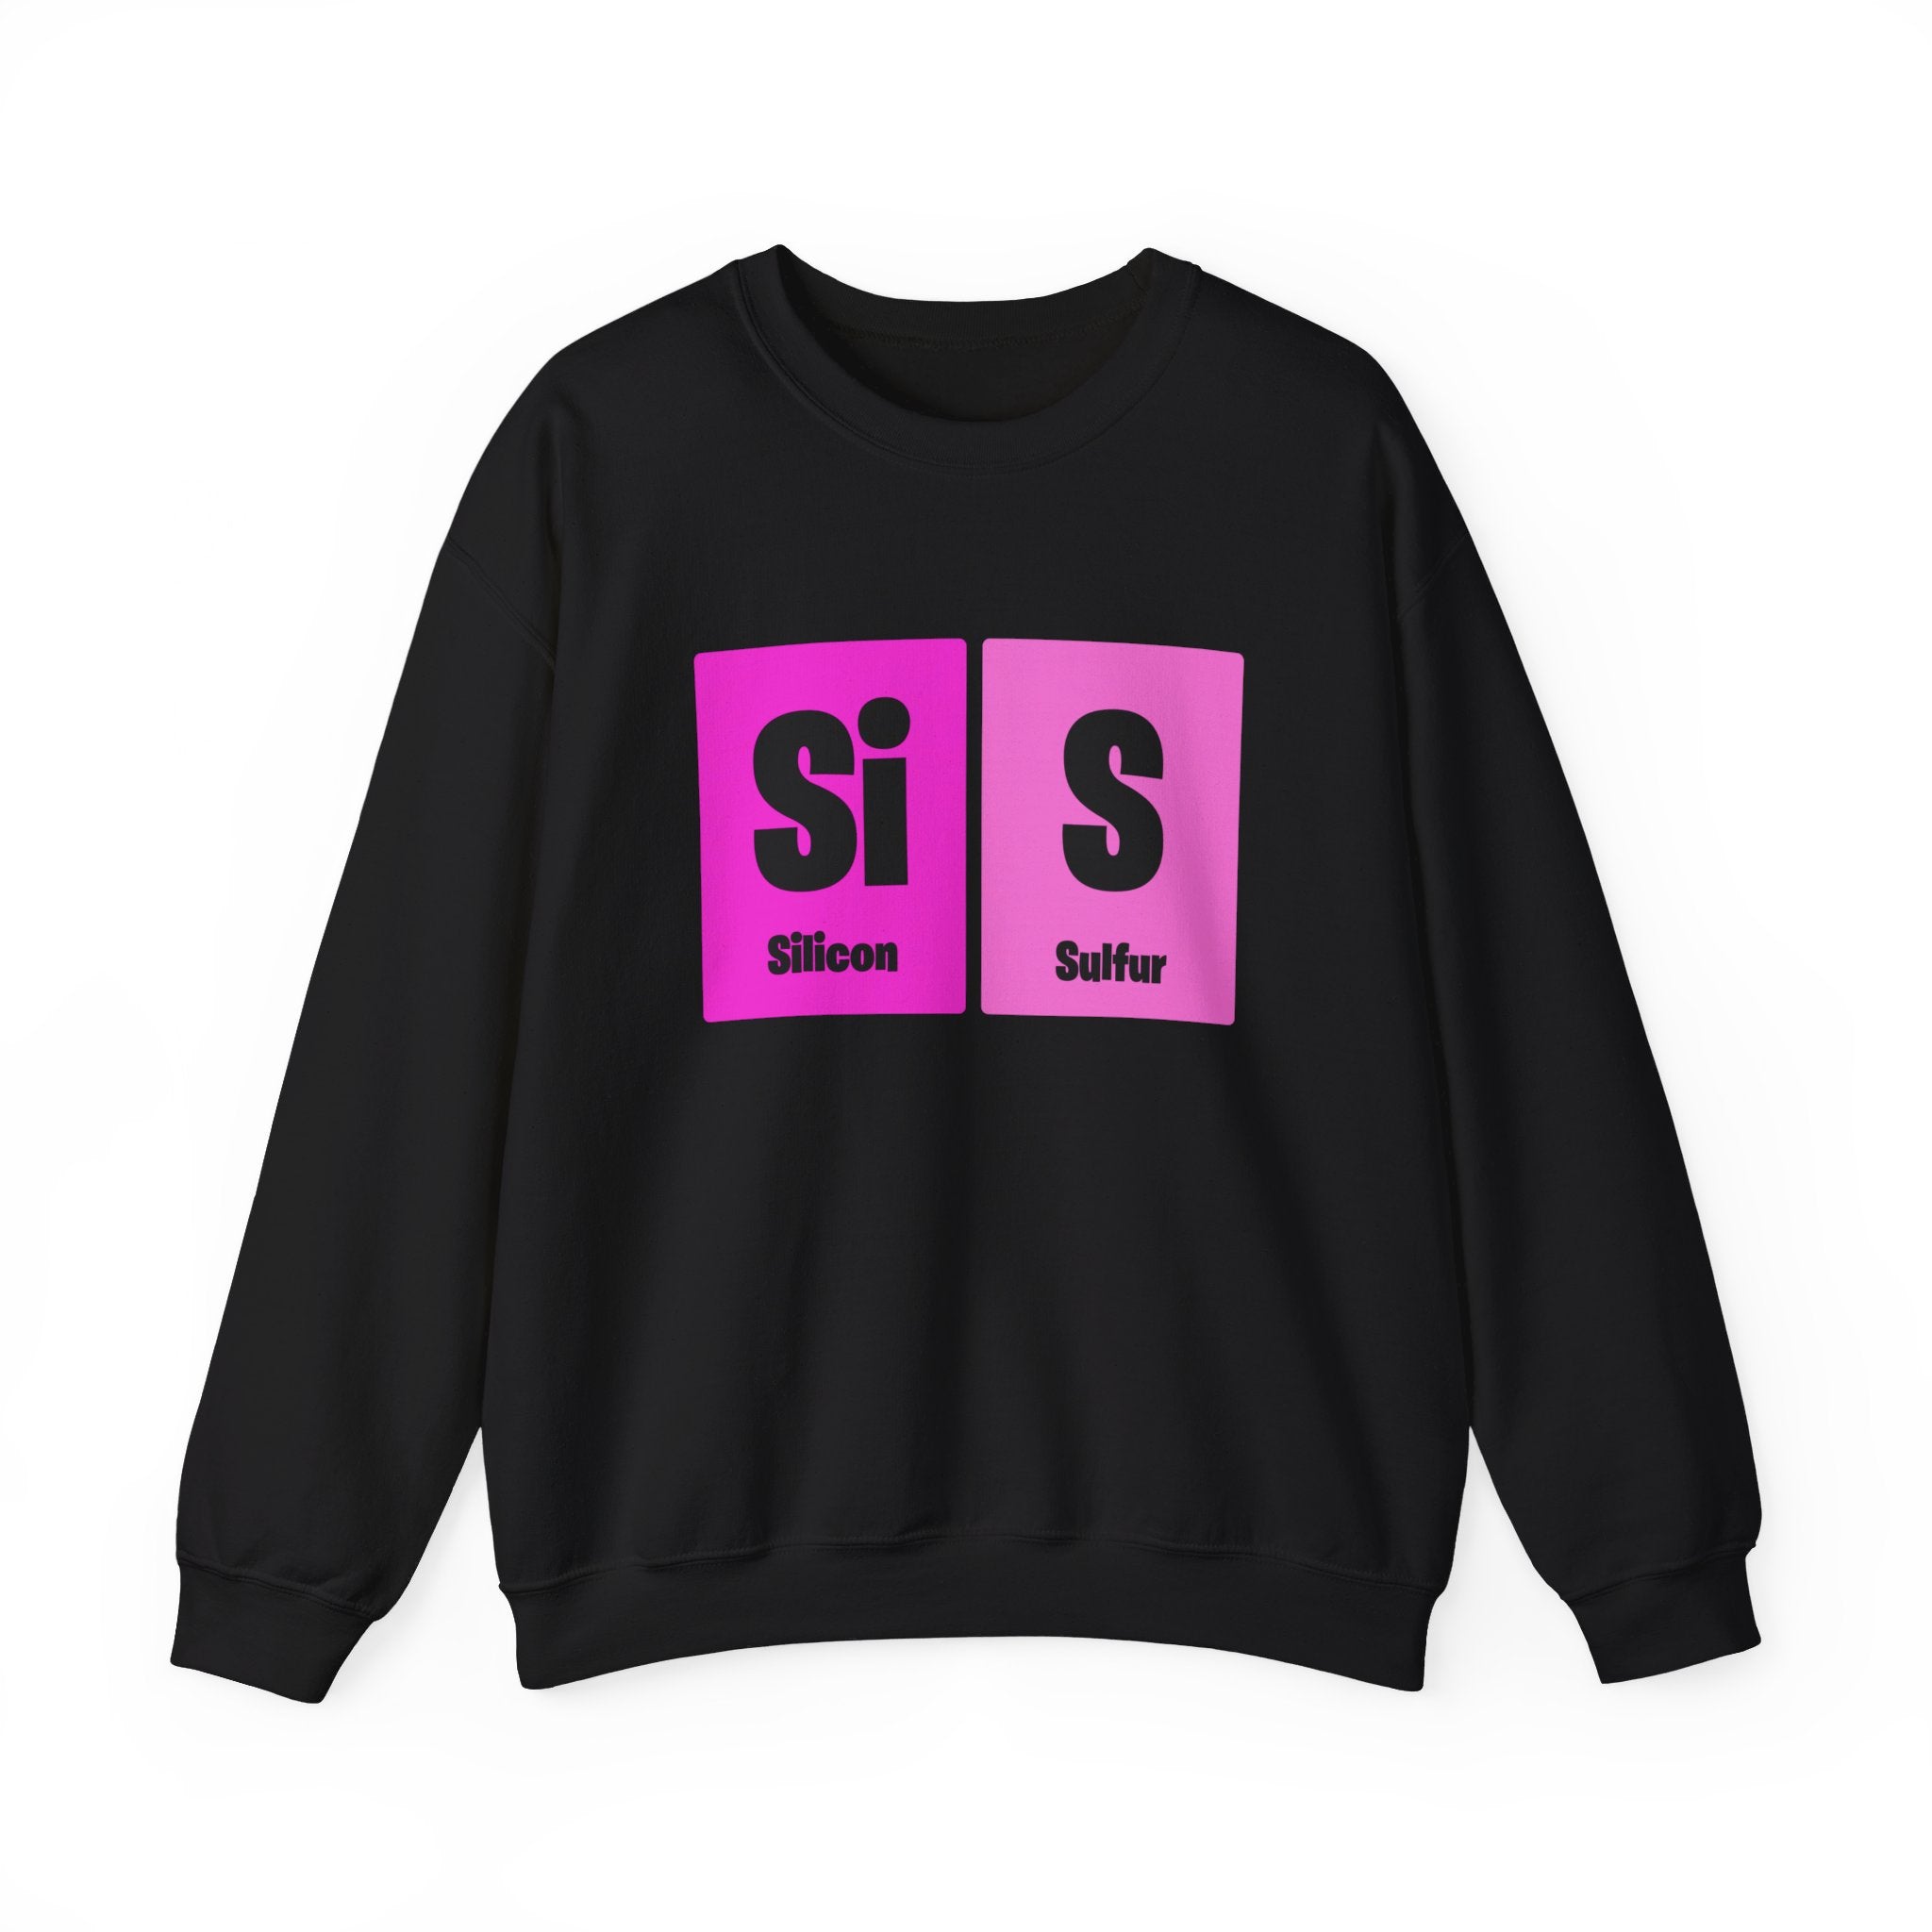 Si-S Light Pendant - Sweatshirt: Black sweatshirt with two pink squares displaying the chemical symbols "Si" for Silicon and "S" for Sulfur, with labels underneath. This stylish piece combines fashion & warmth, making it a chic addition to your wardrobe.